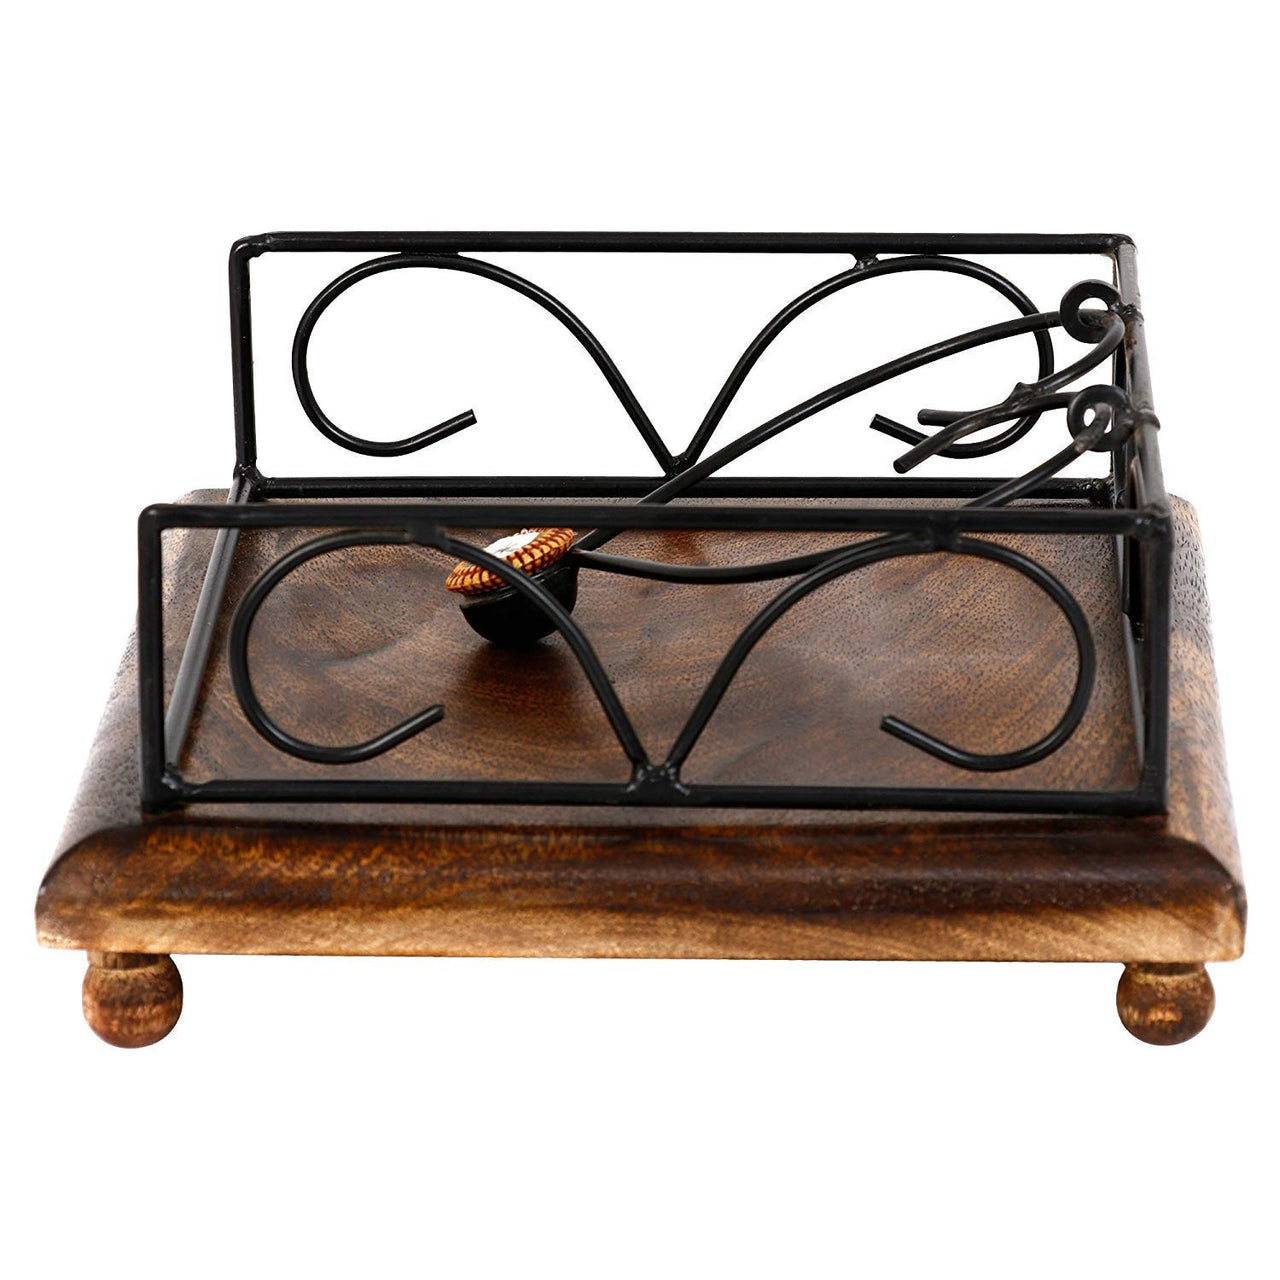 Wrought Iron and Wooden Napkin Holder for Dining Table, Kitchen - Tissue Paper Stand for Restaurant, Bathroom - Handmade Iron Tissue Box, Brown Dime Store